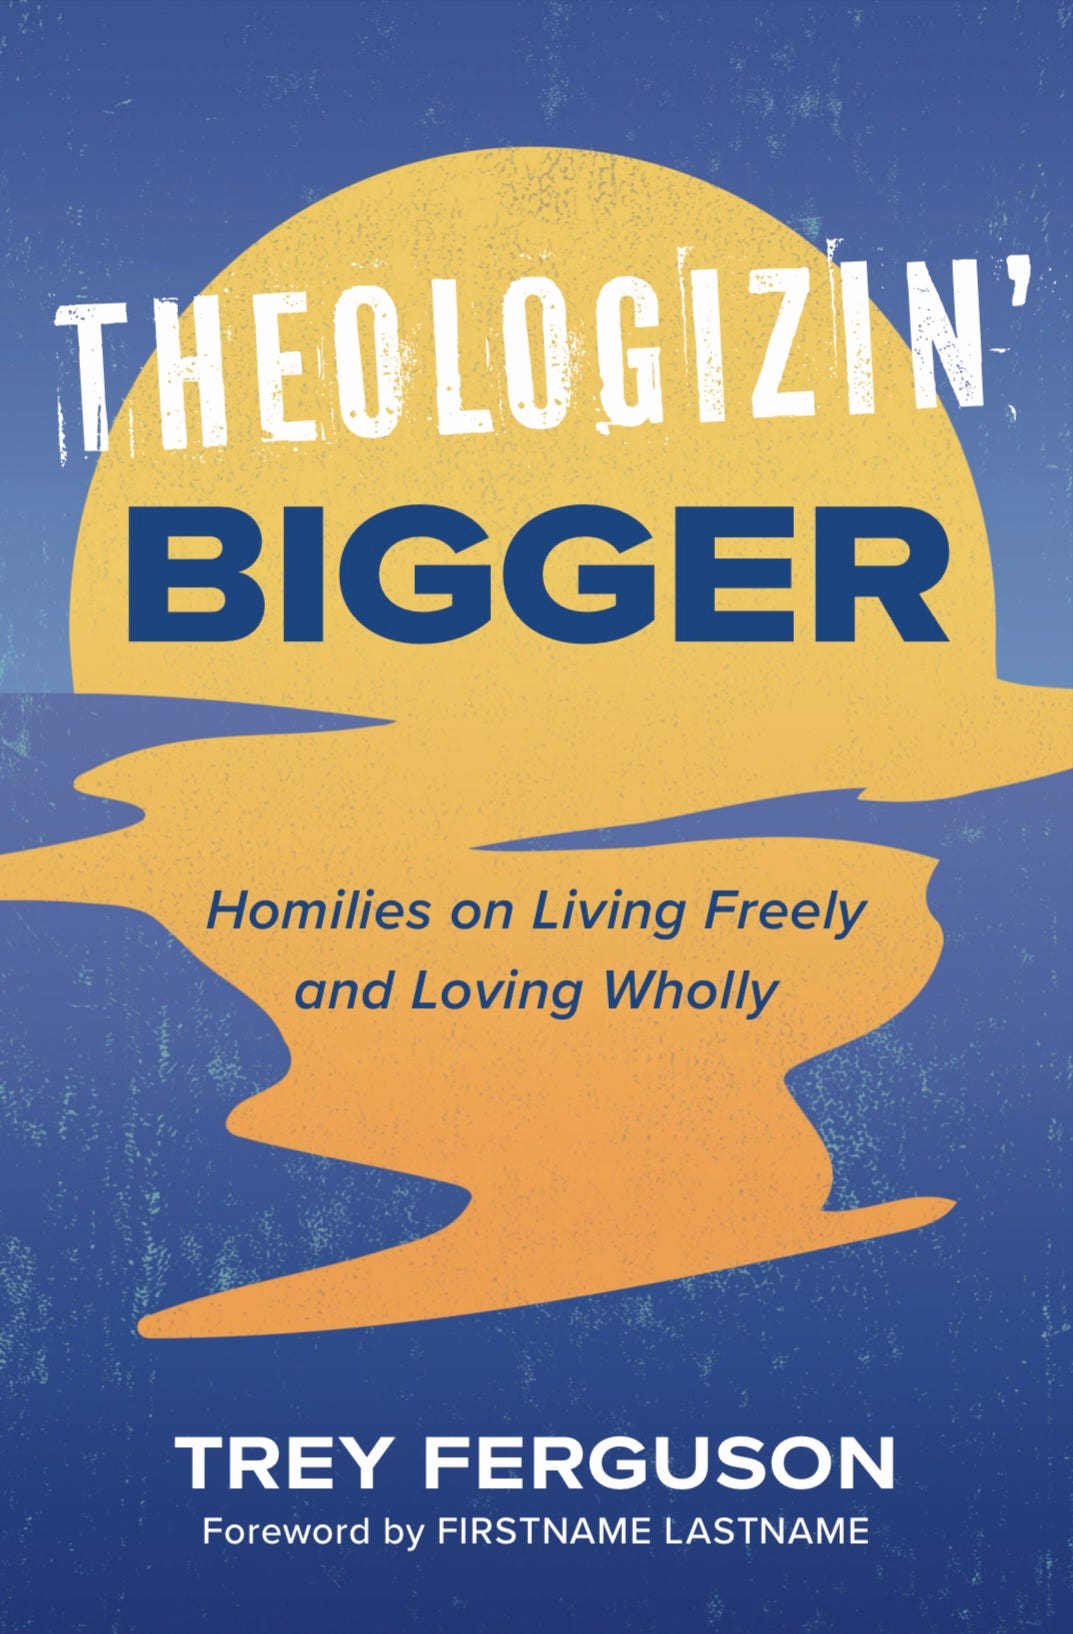 A book cover concept with the title "Theologizin Bigger" over a yellow sun and the subtitle "Homilies on Living Freely and Loving Wholly" on the reflection of that sun over a body of water.